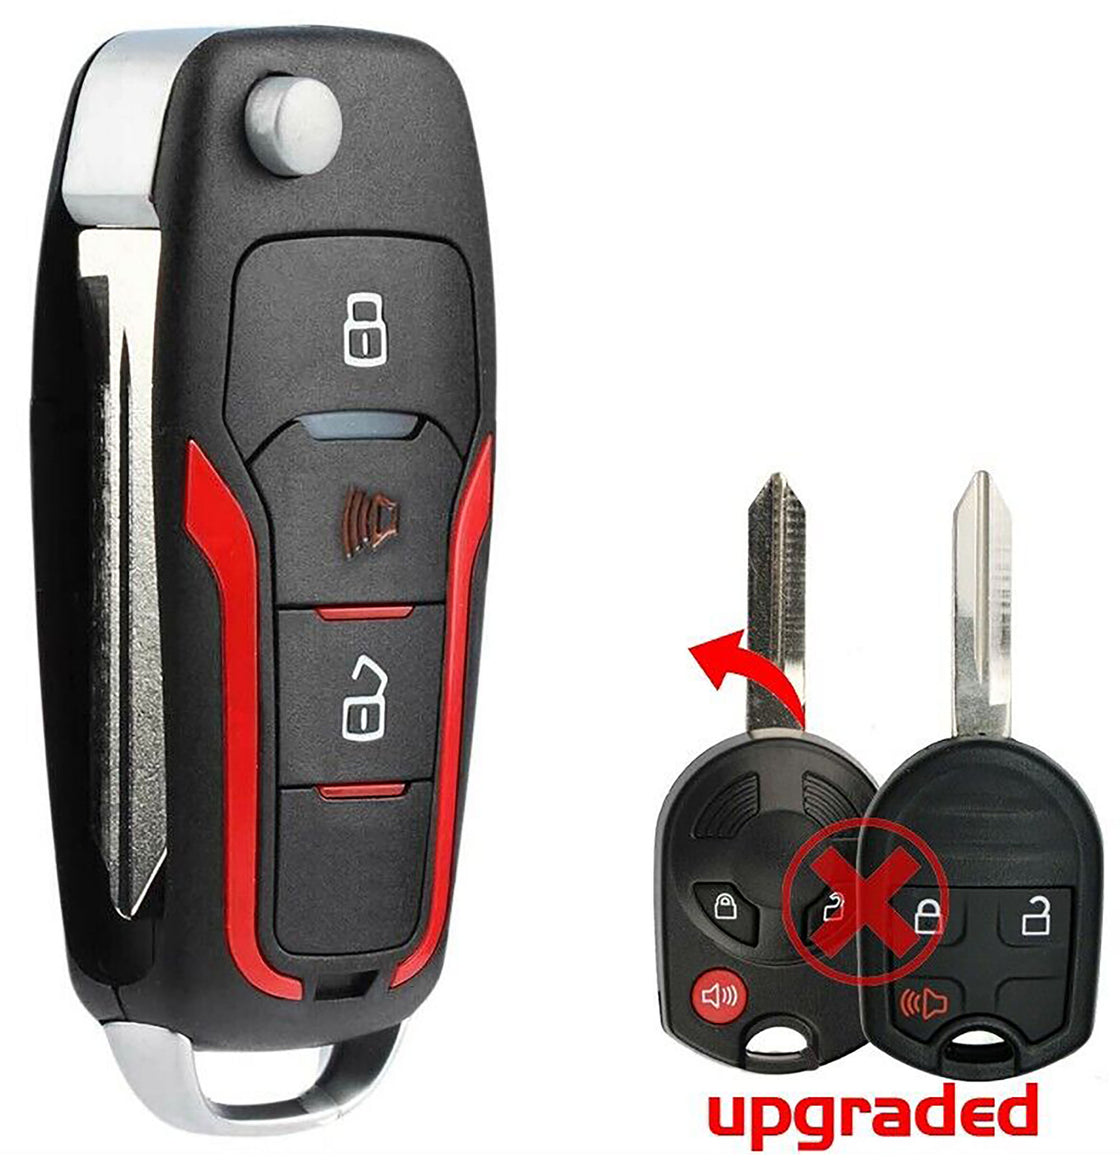 1x New Replacement Keyless Entry Remote Key Fob Compatible with & Fit For Ford Mazda Lincoln Mercury - MPN CWTWB1U793-UP-04